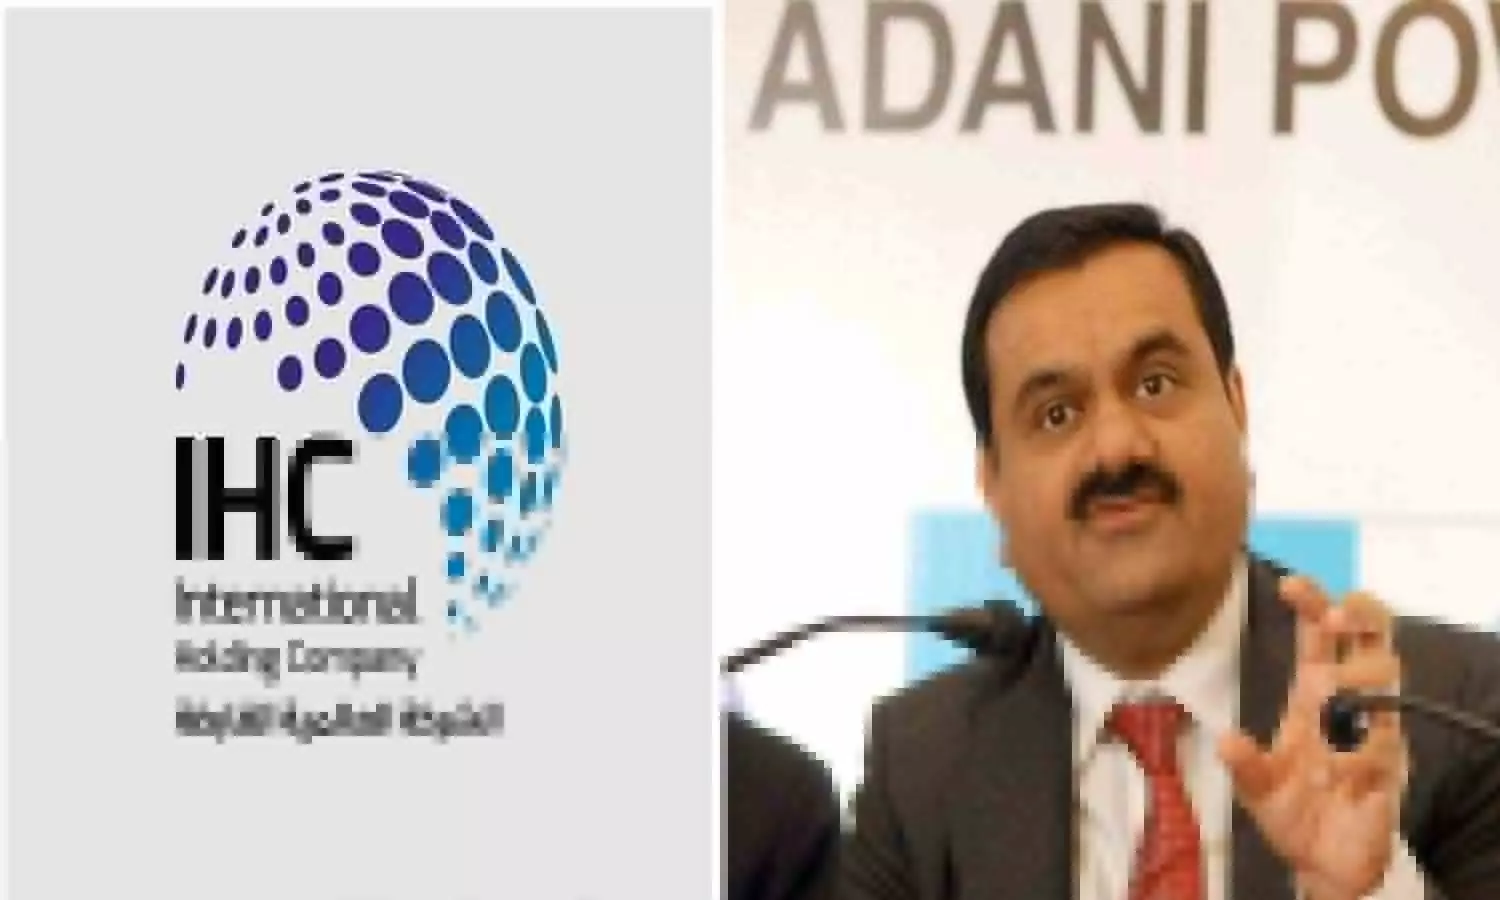 Business: International holding company of Middle East to invest USD 2 billion in Adani Group